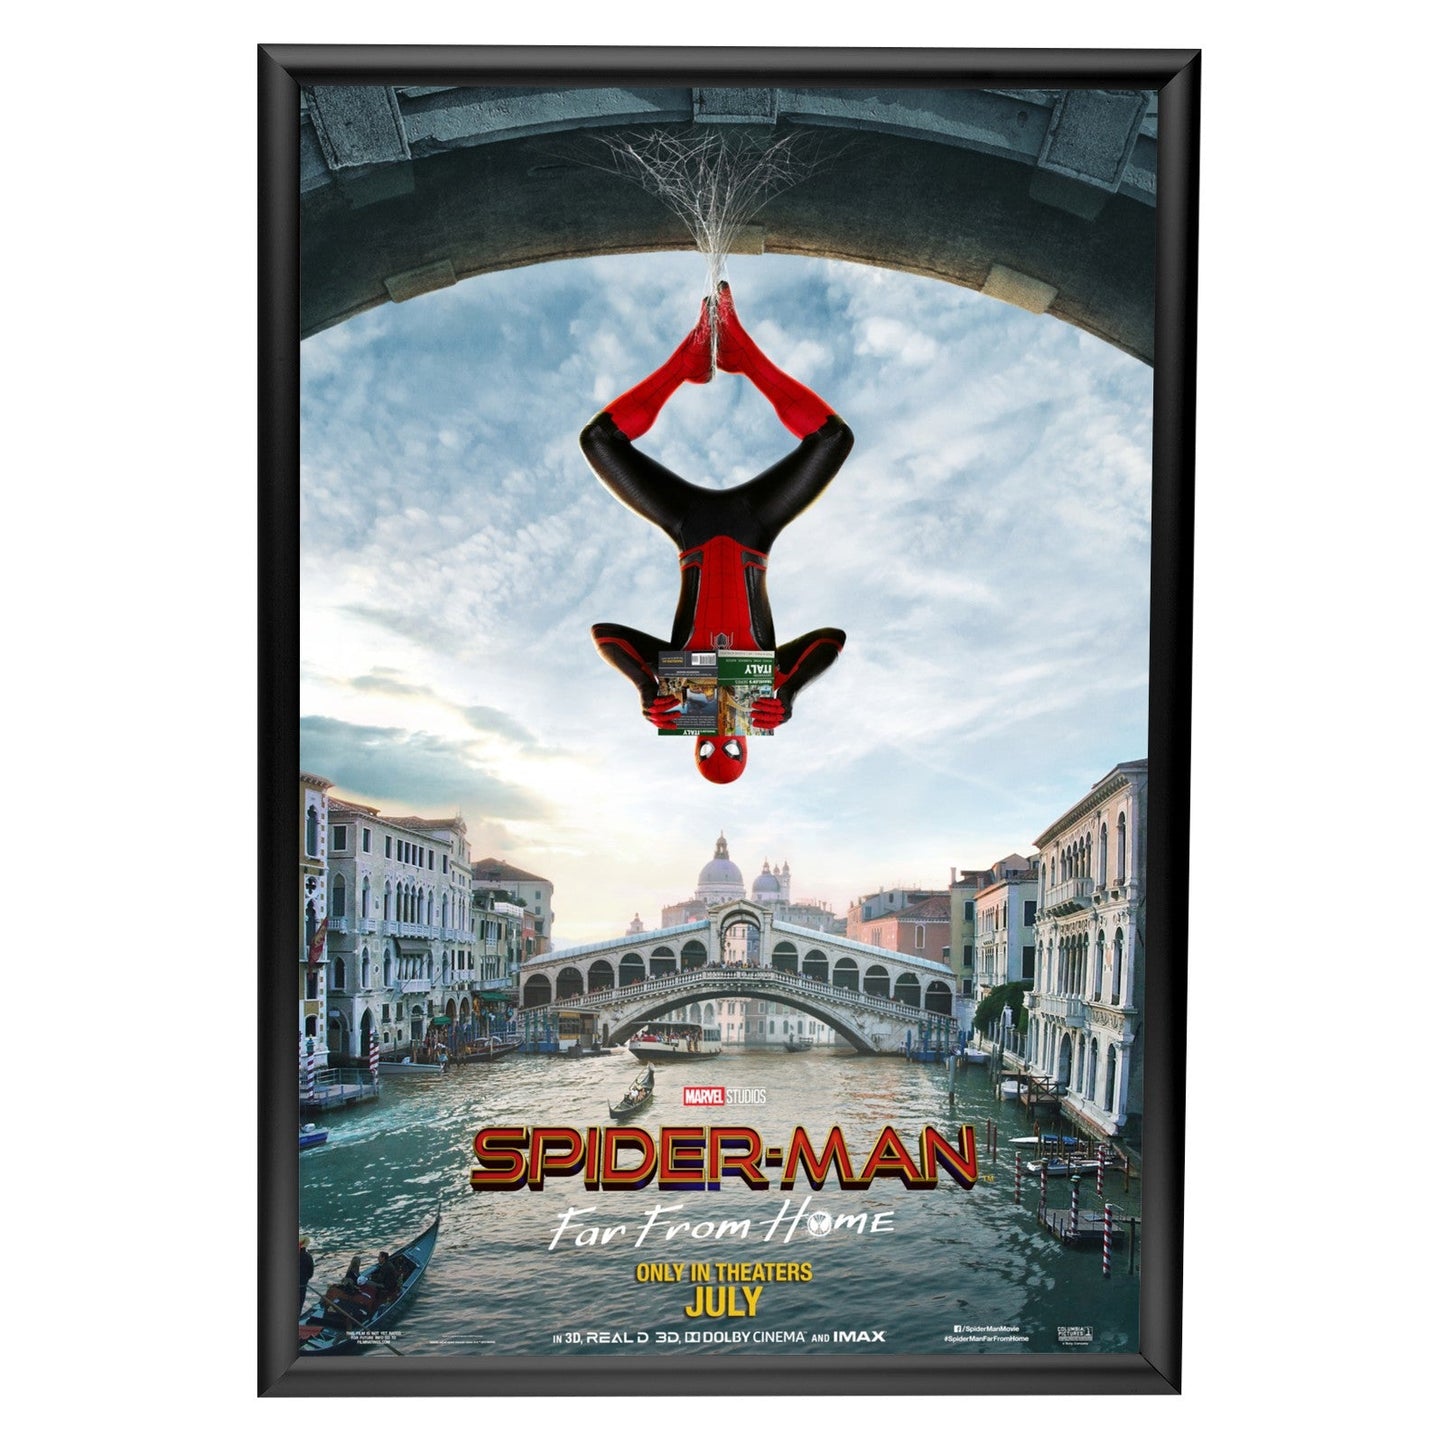 THE AMAZING SPIDER-MAN - 11x17 Framed Movie Poster